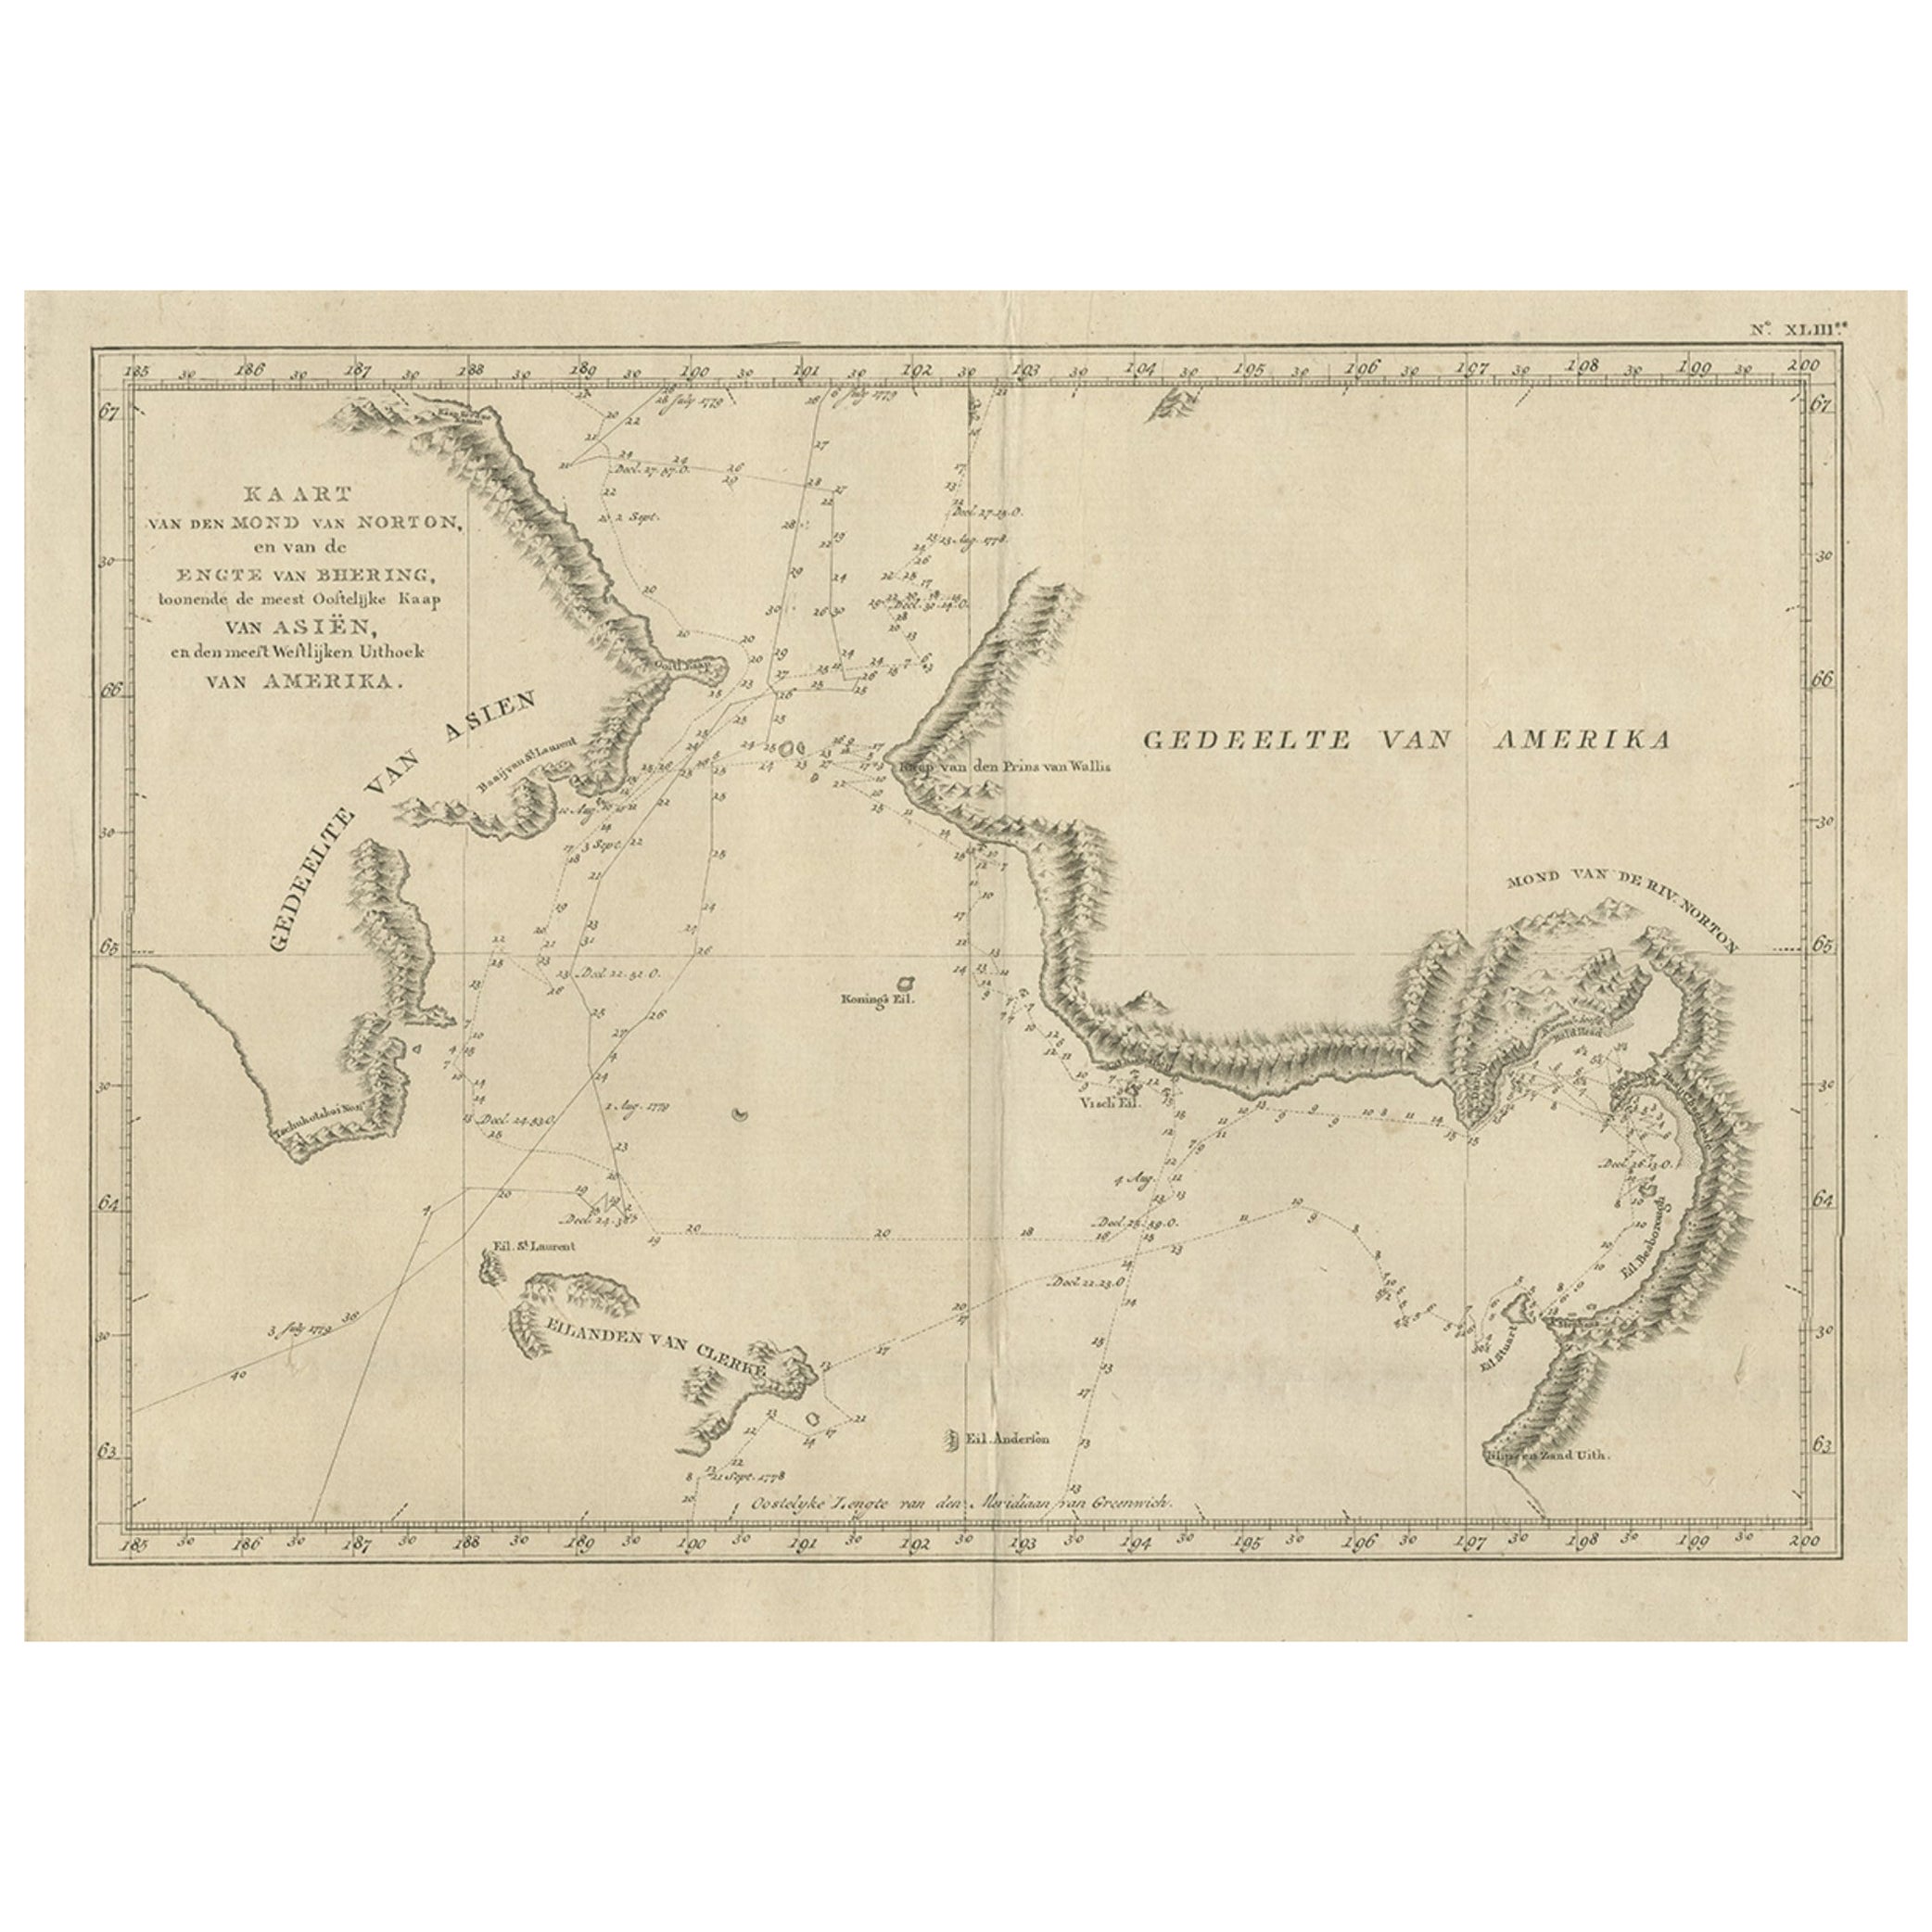 Original Copper Engraved Map of the Bering Strait by Captain Cook, 1803